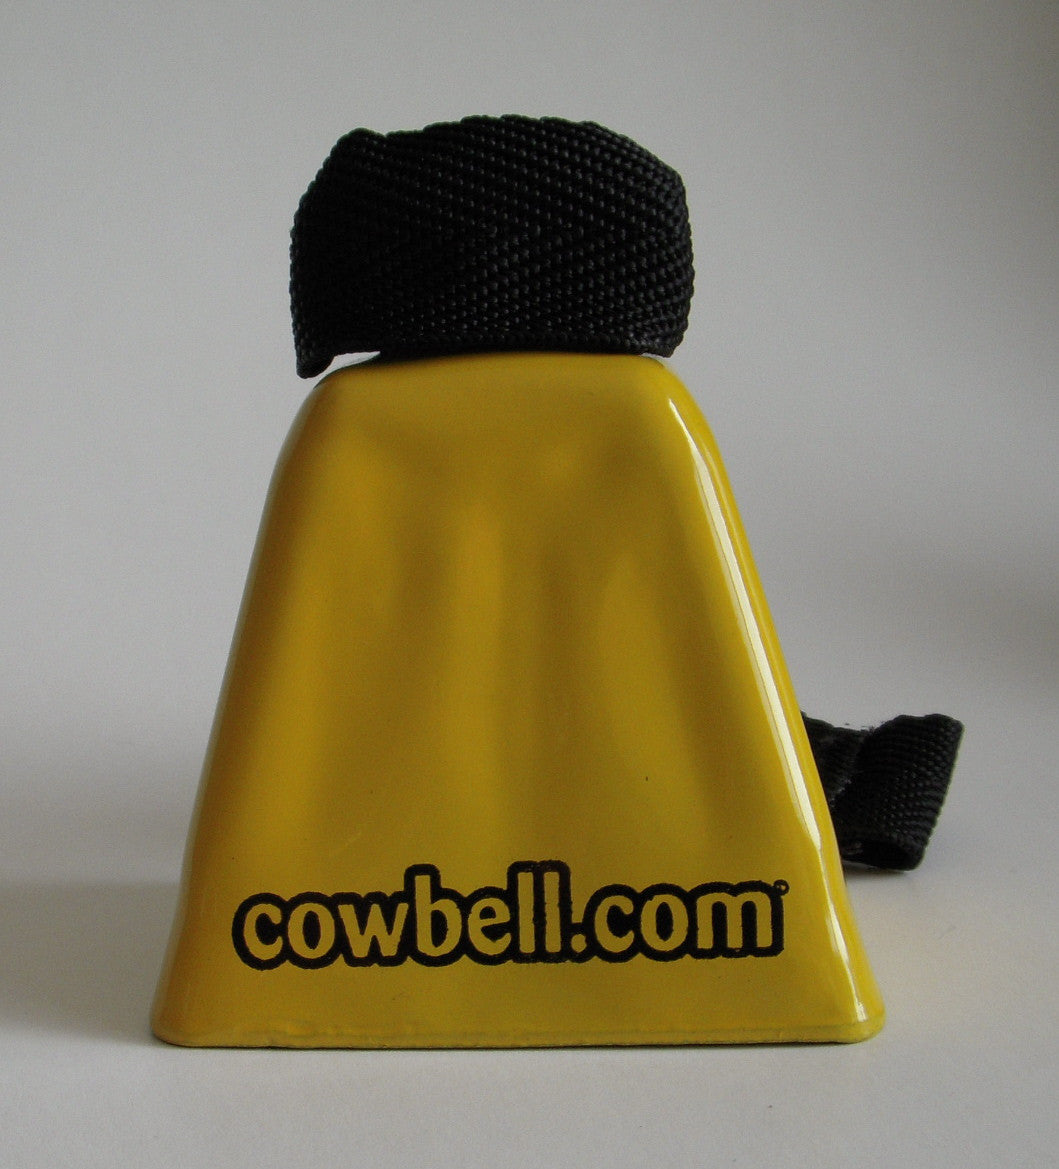 Limited Edition FarmVille Cowbell in 4 sizes :: from $15 